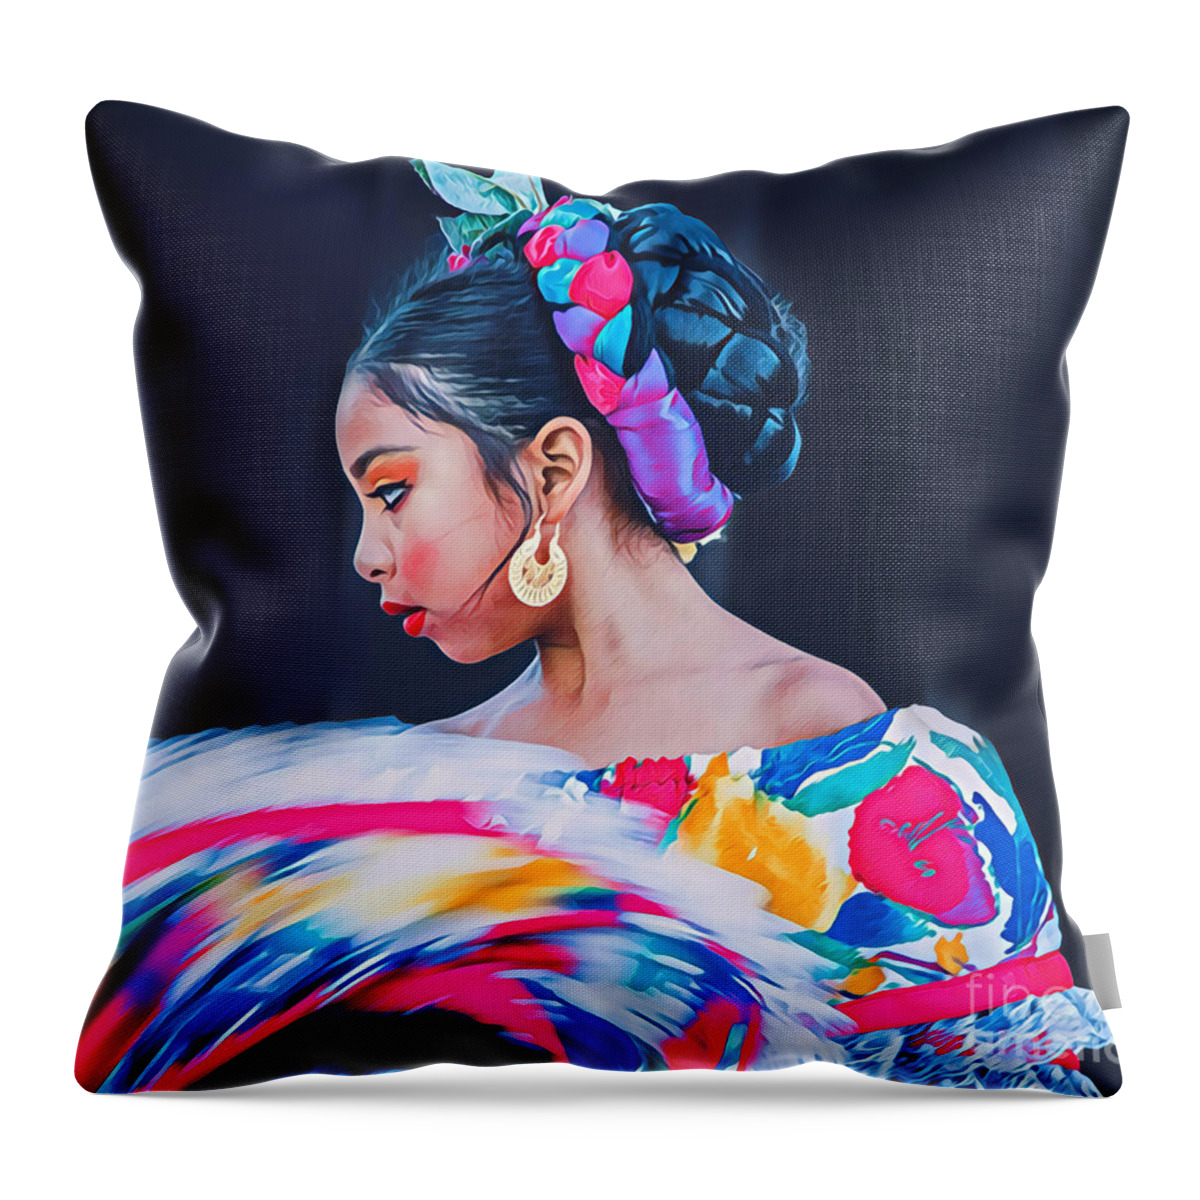 Dancer Throw Pillow featuring the photograph Exquisite Hispanic Dancer With Swirling Skirt by Susan Vineyard